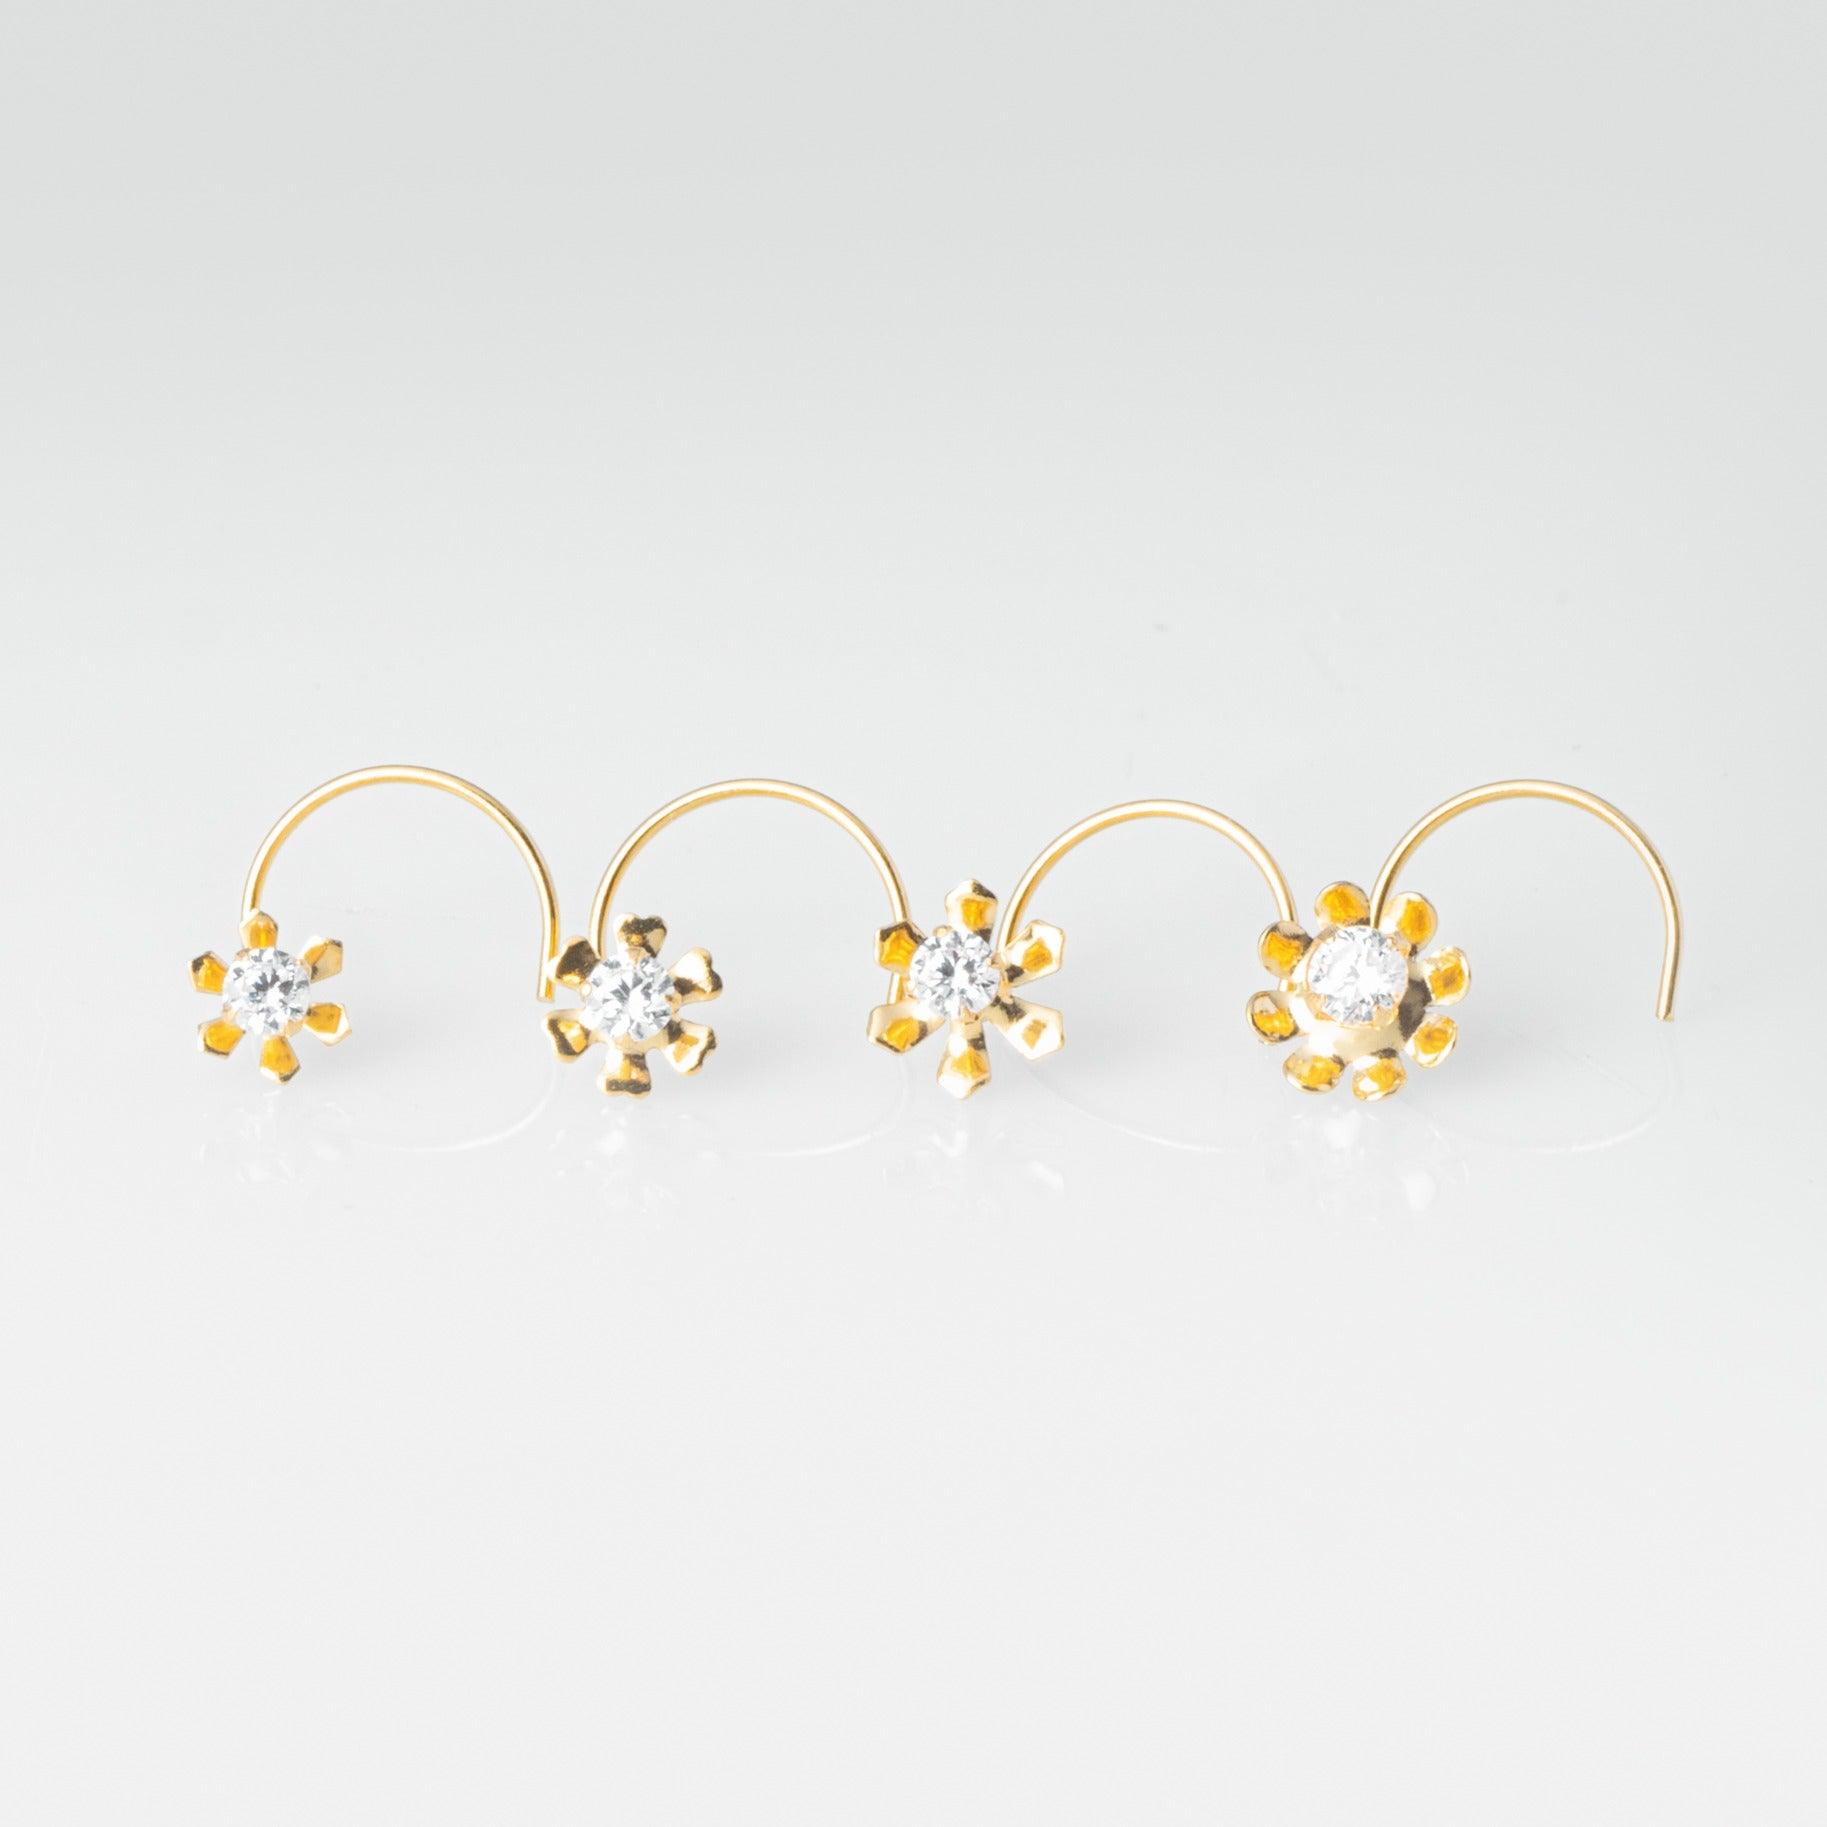 18ct Yellow Gold Wire Coil Back Nose Stud set with Cubic Zirconia in a Flower Design (4.5mm - 6mm) NIP-4-080